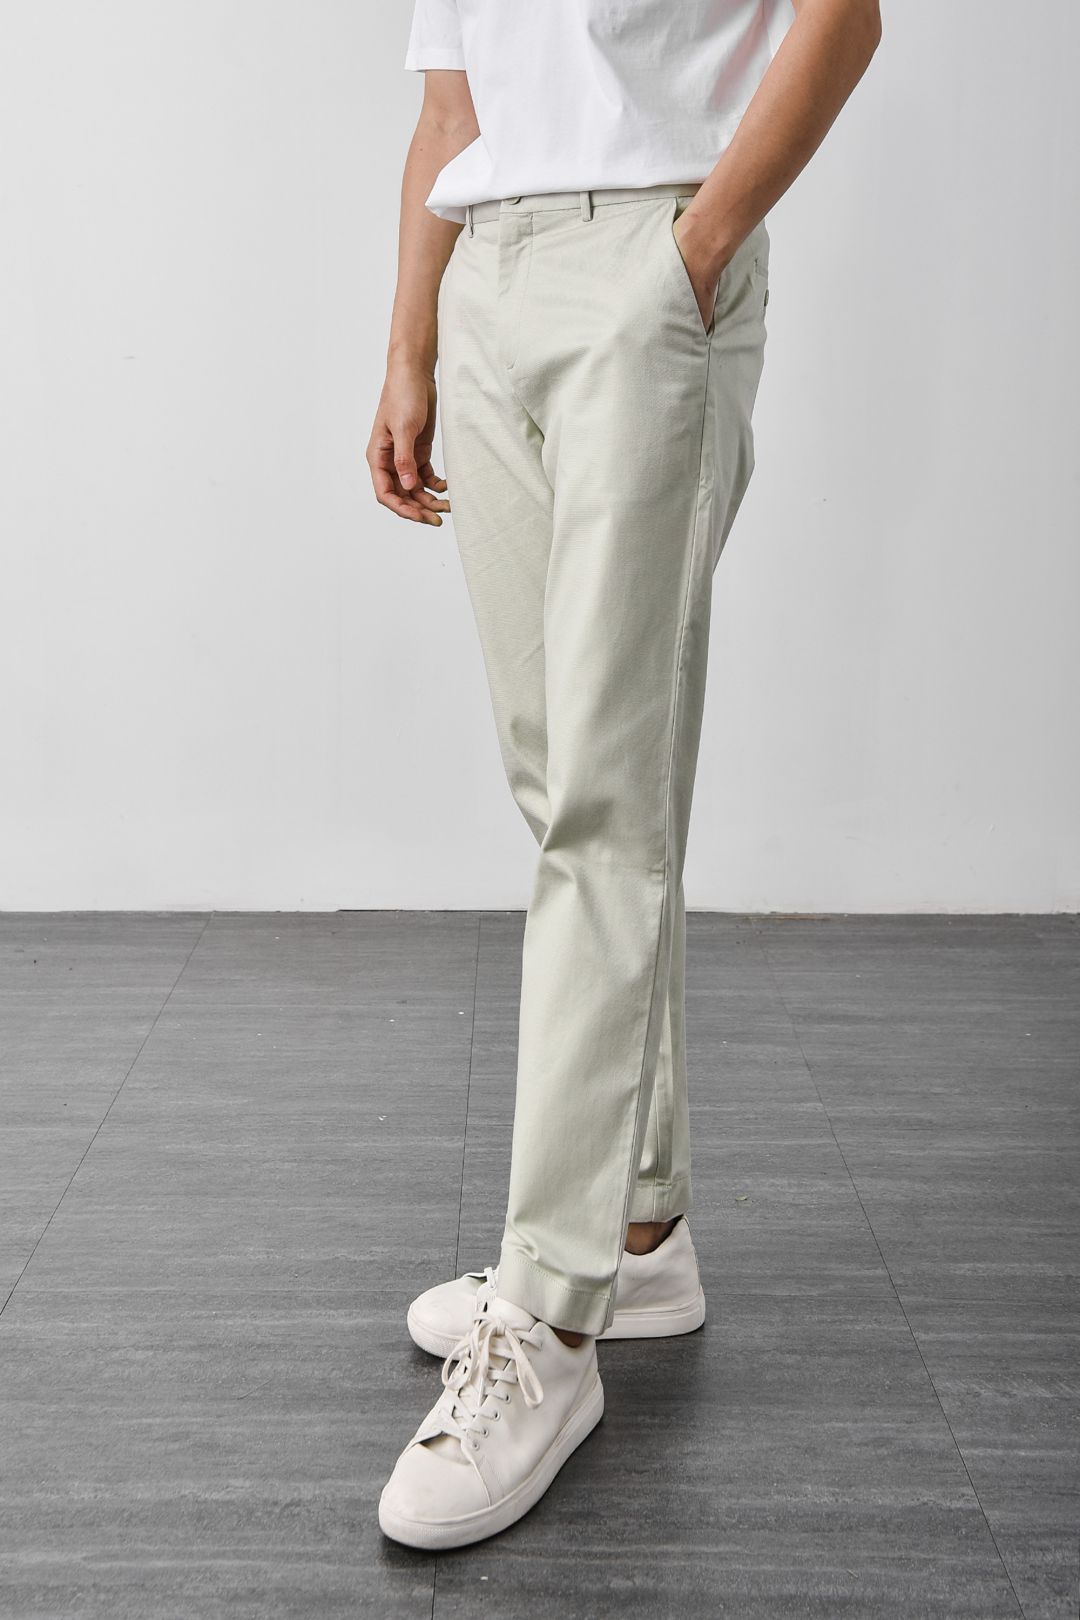 Cropped Athletic Chino Pants from Abercrombie & Fitch | Men fashion casual  shirts, Mens fashion chinos, Cropped chinos